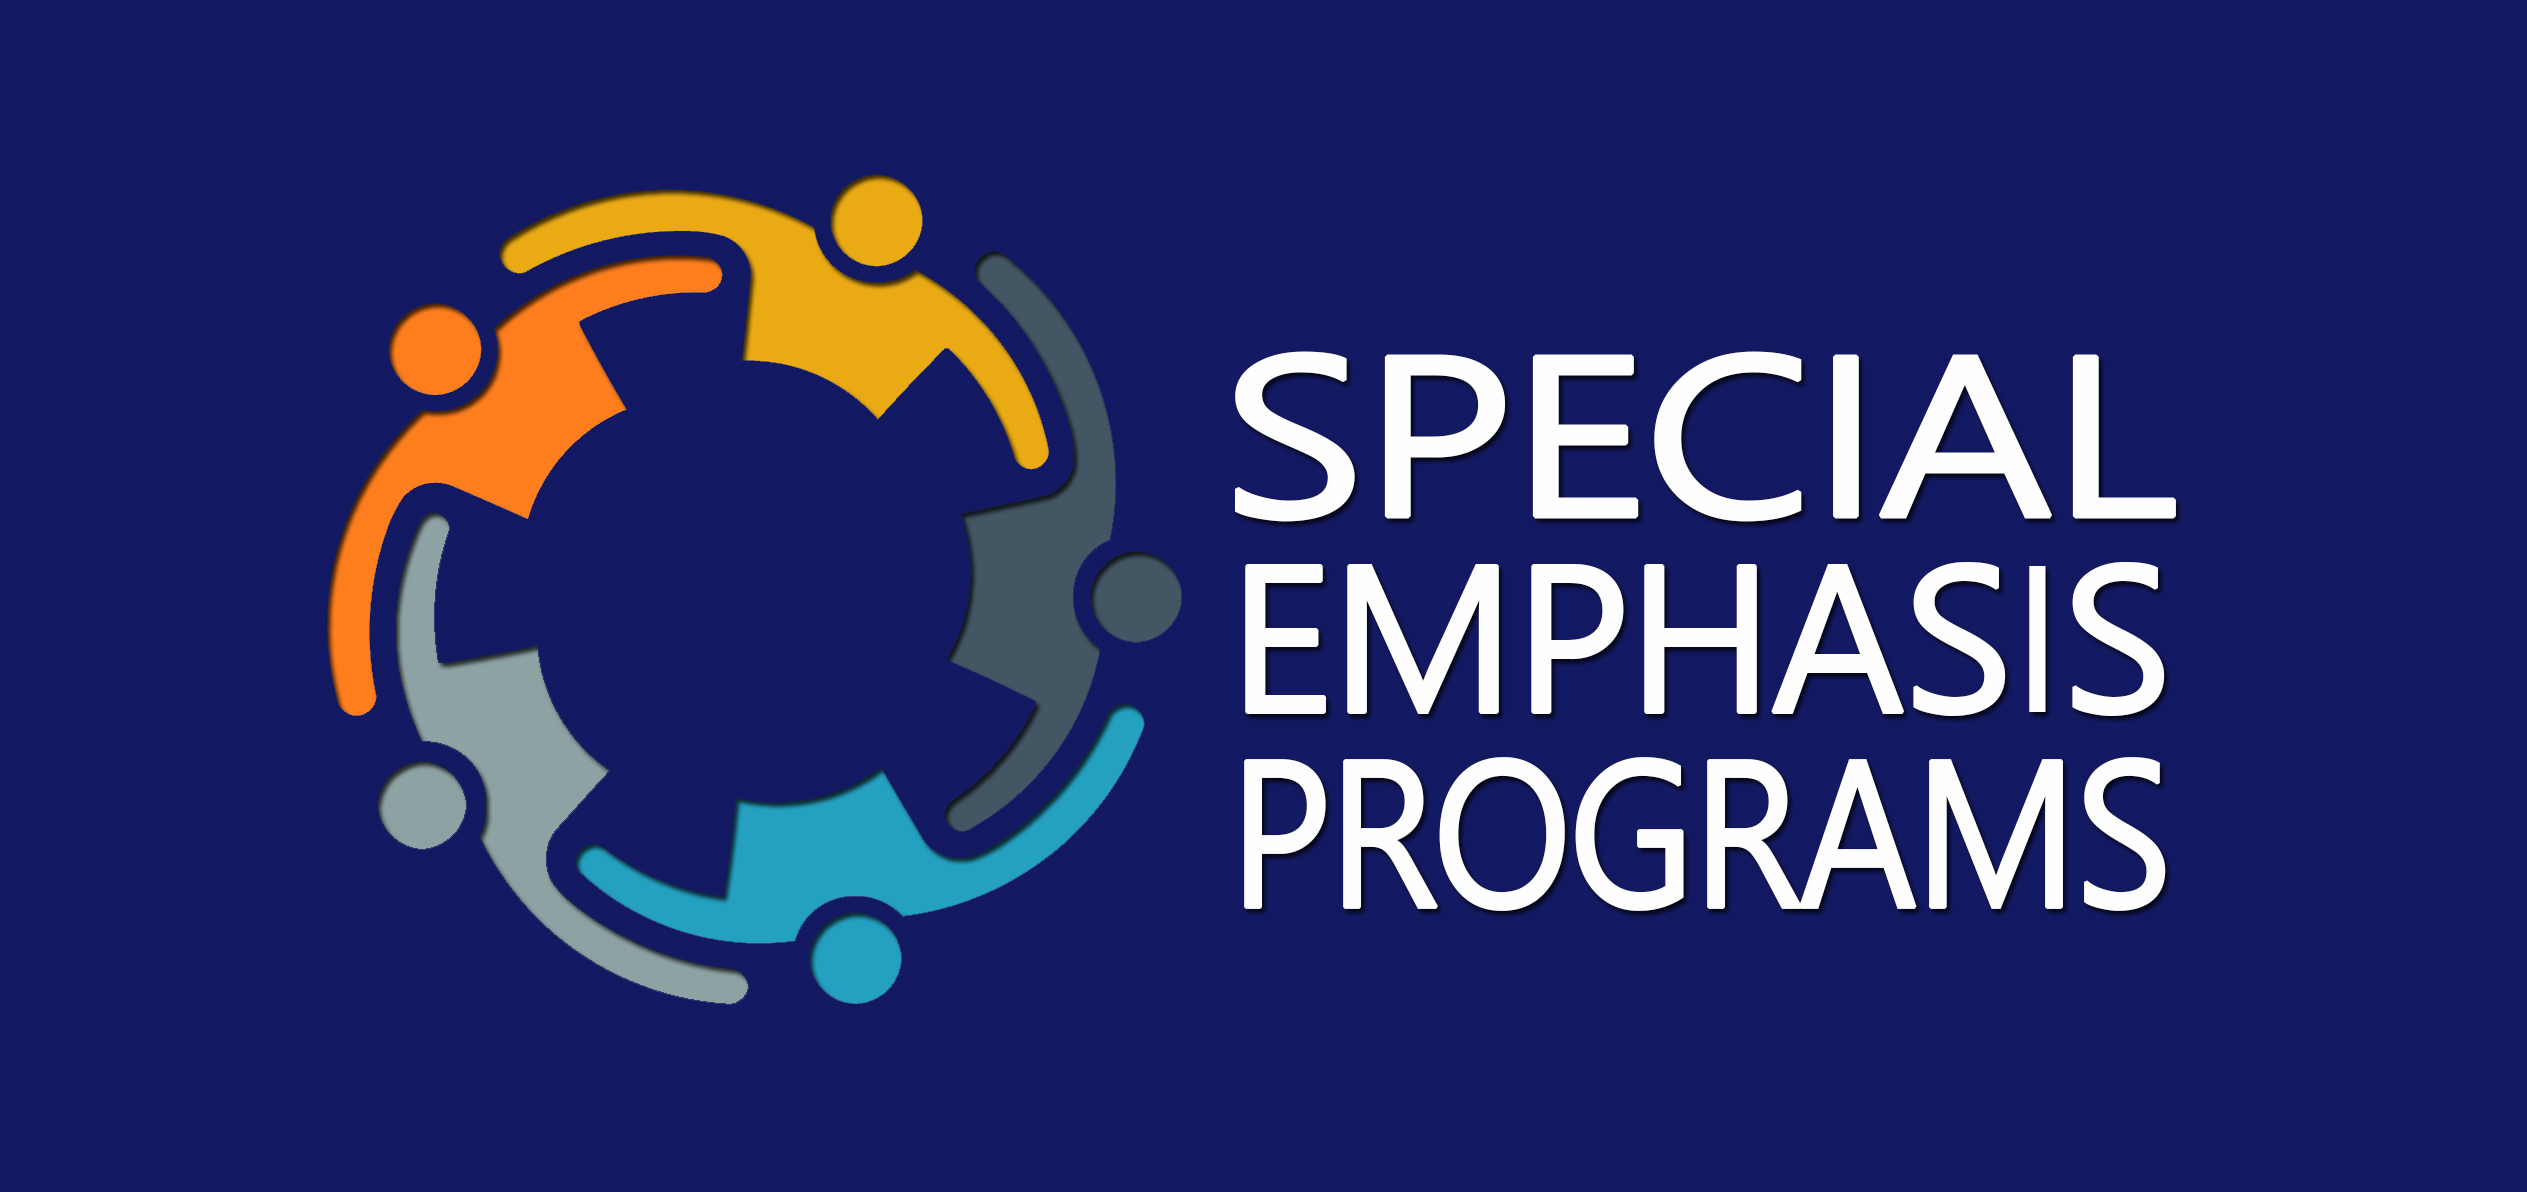 Special Emphasis Programs U.S. Department of Commerce